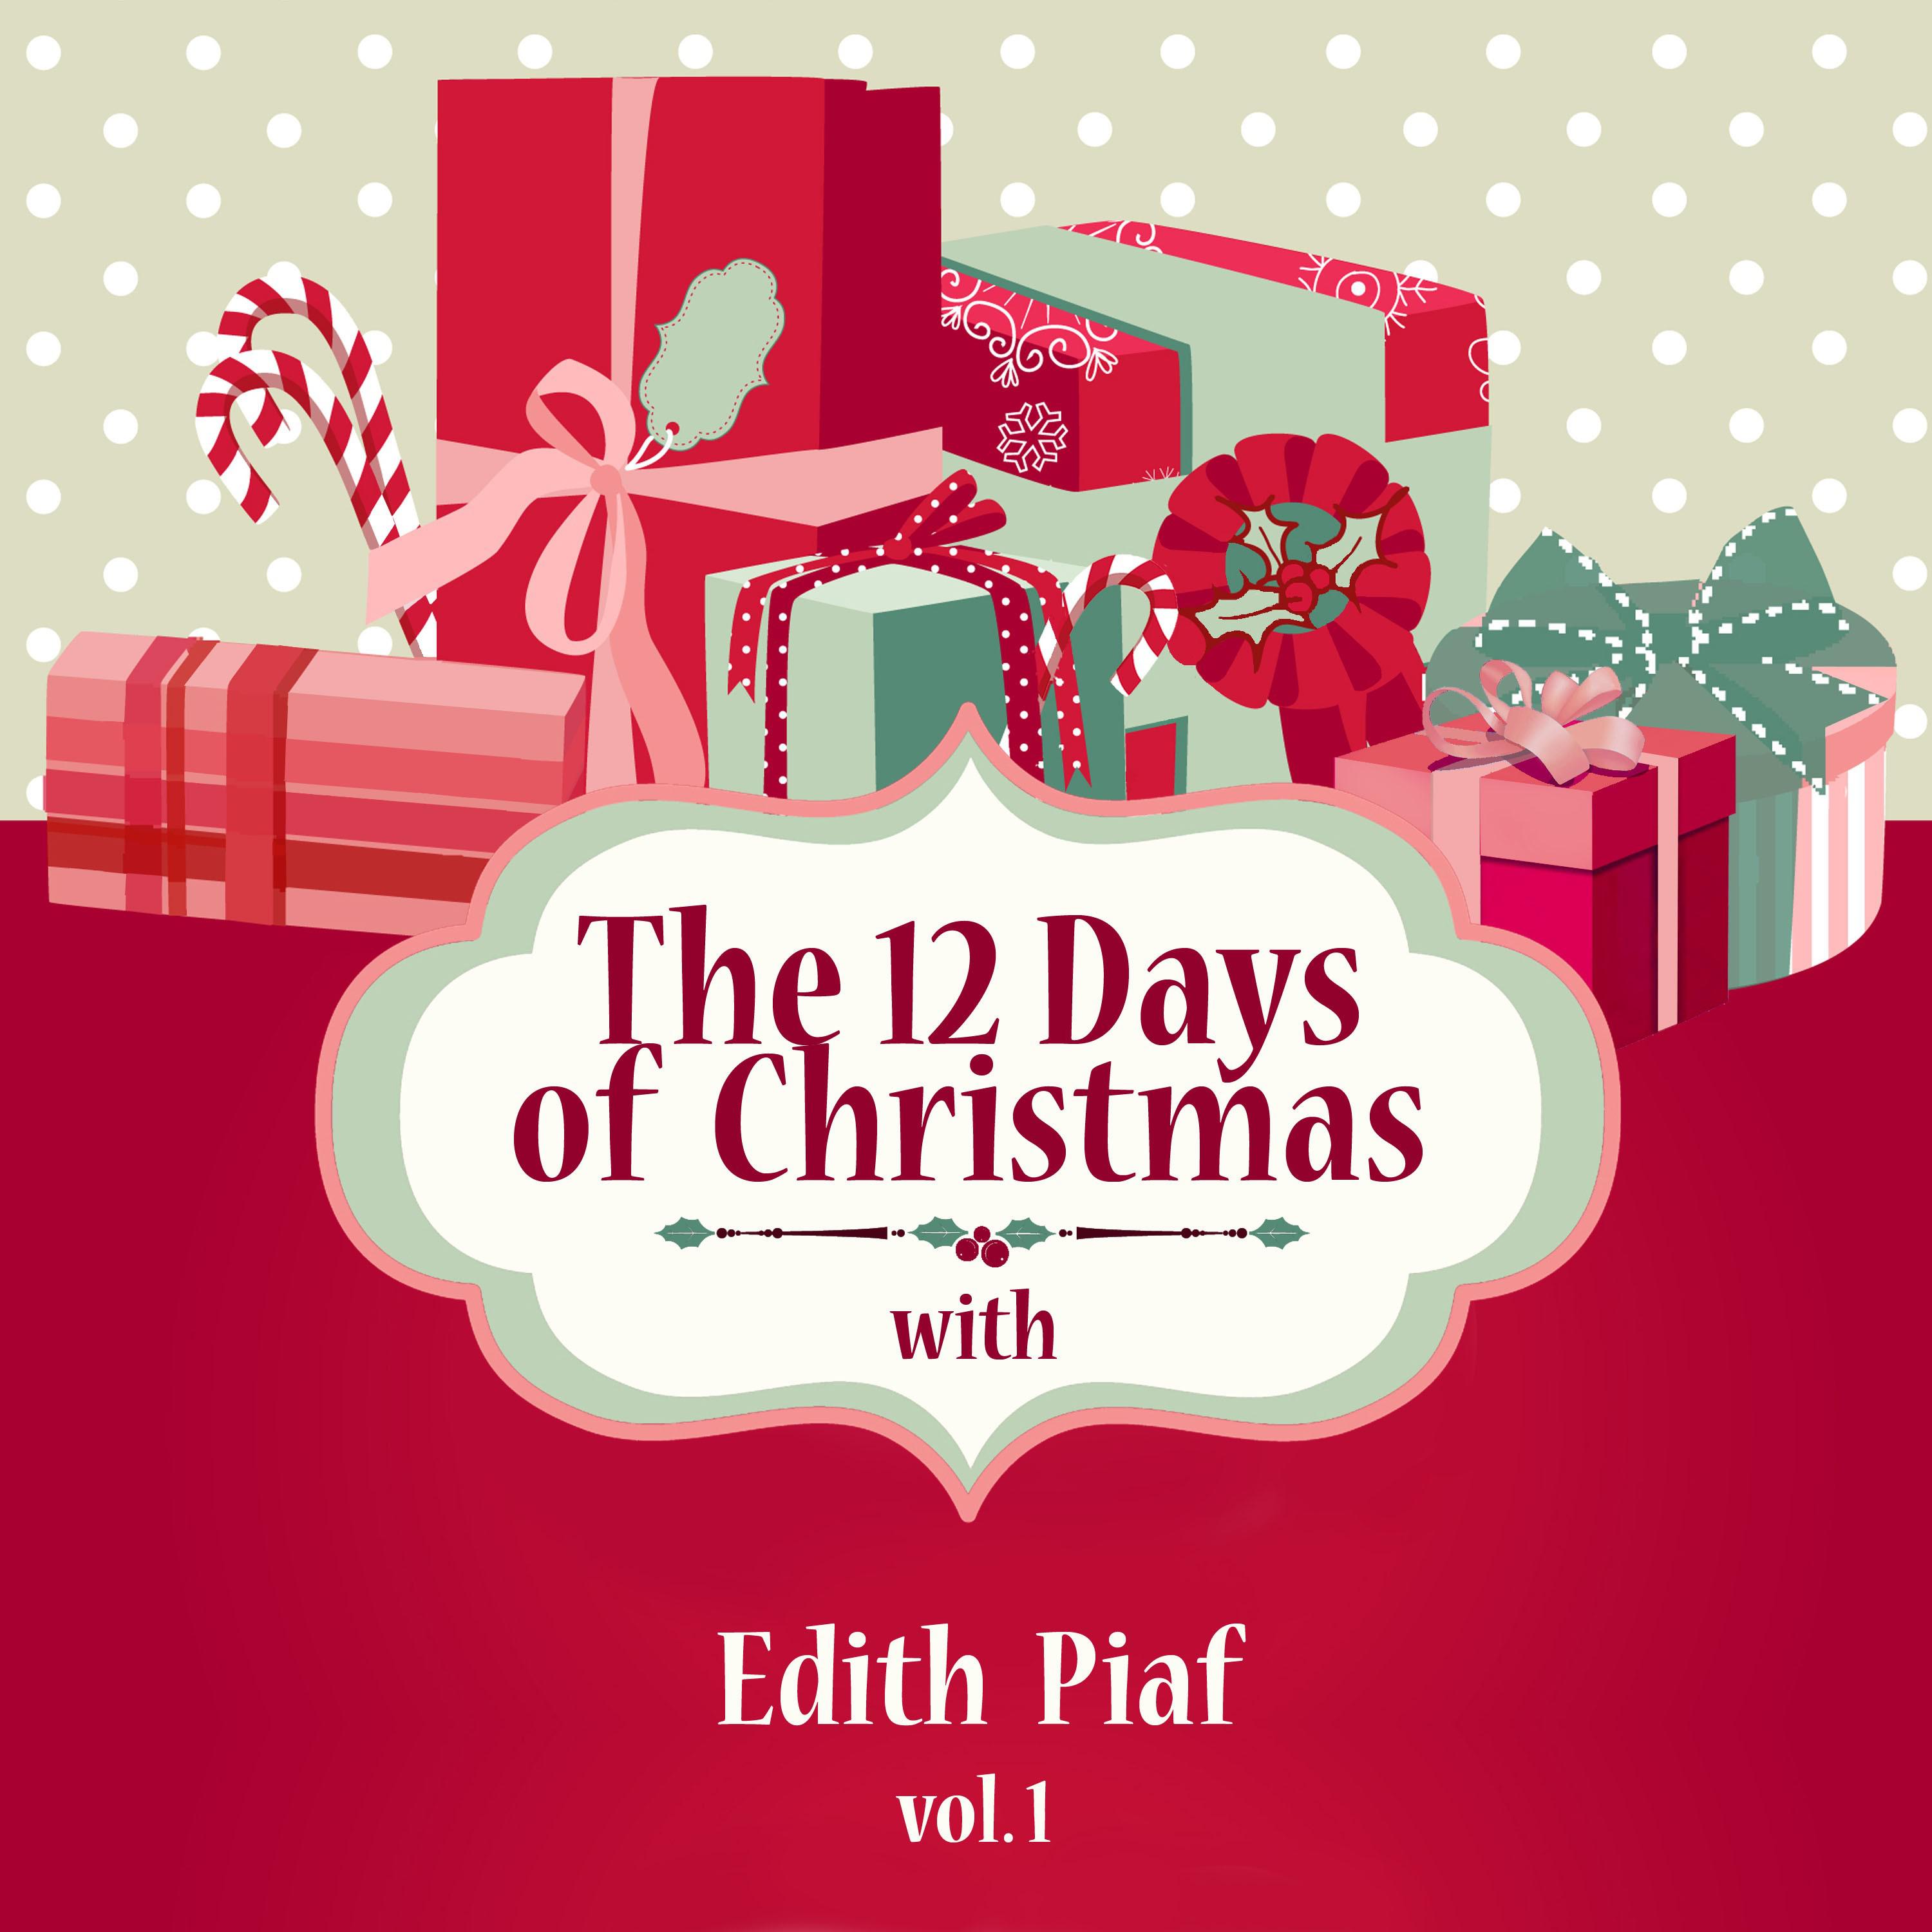 The 12 Days of Christmas with Edith Piaf, Vol. 1